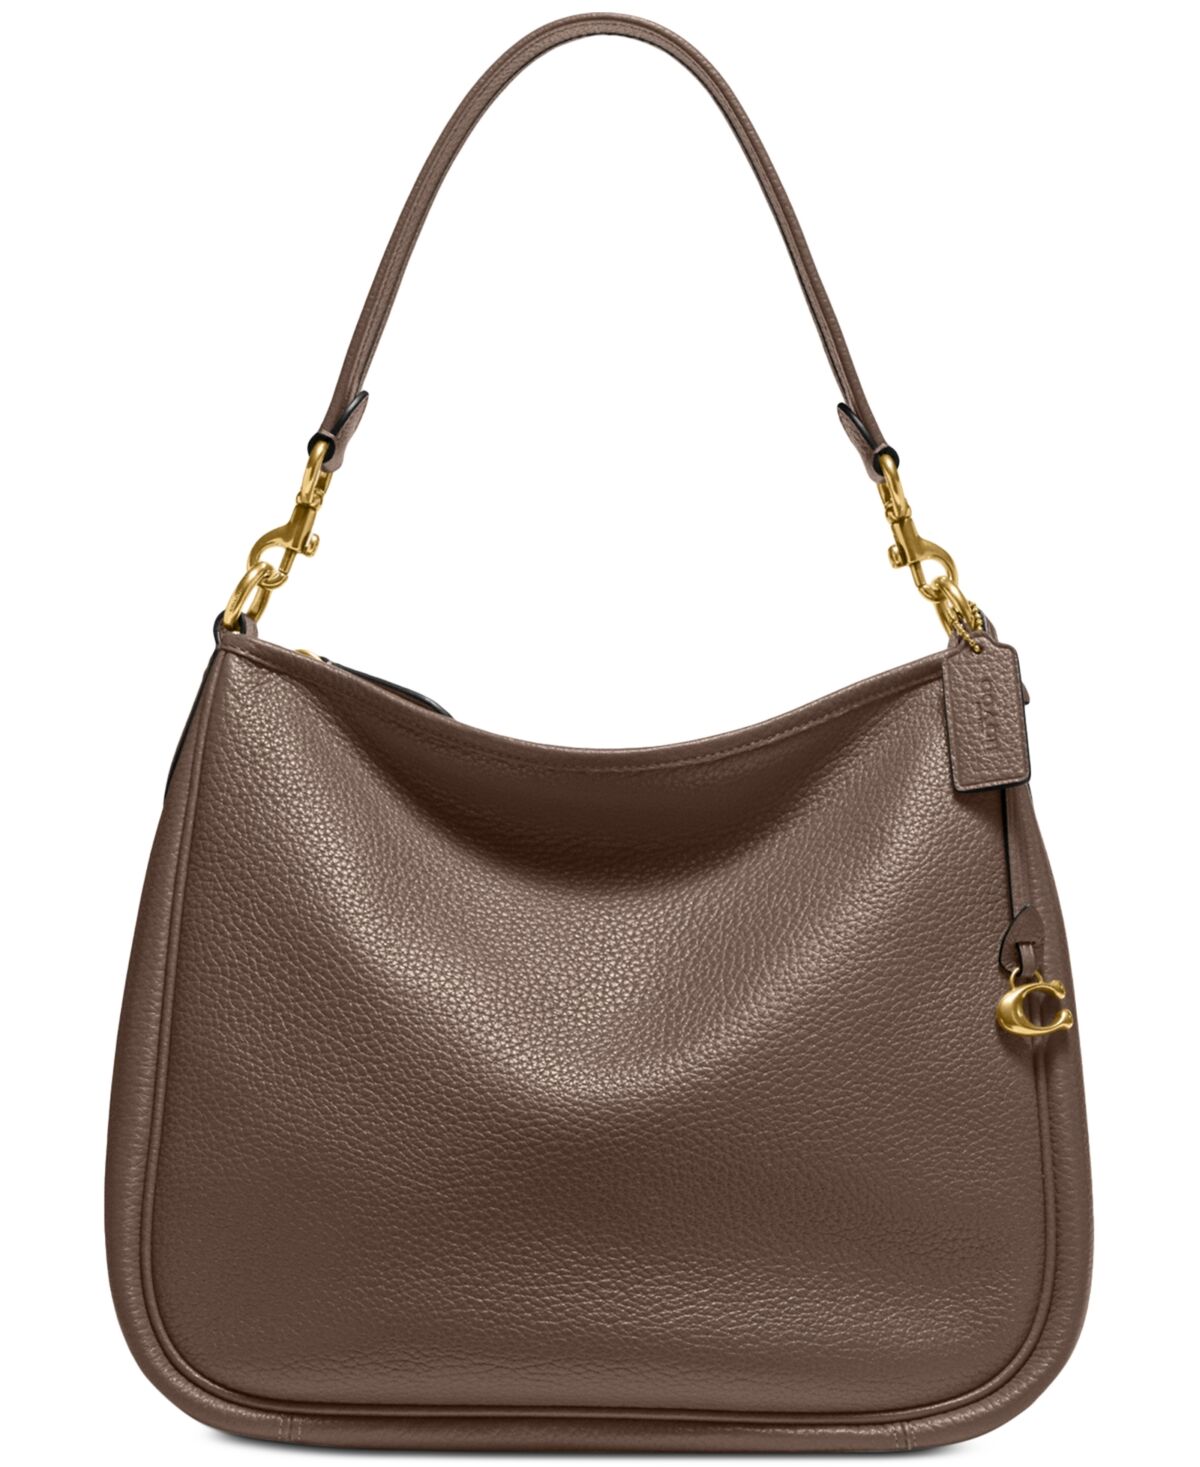 Coach Soft Pebble Leather Cary Shoulder Bag with Convertible Straps - Moss